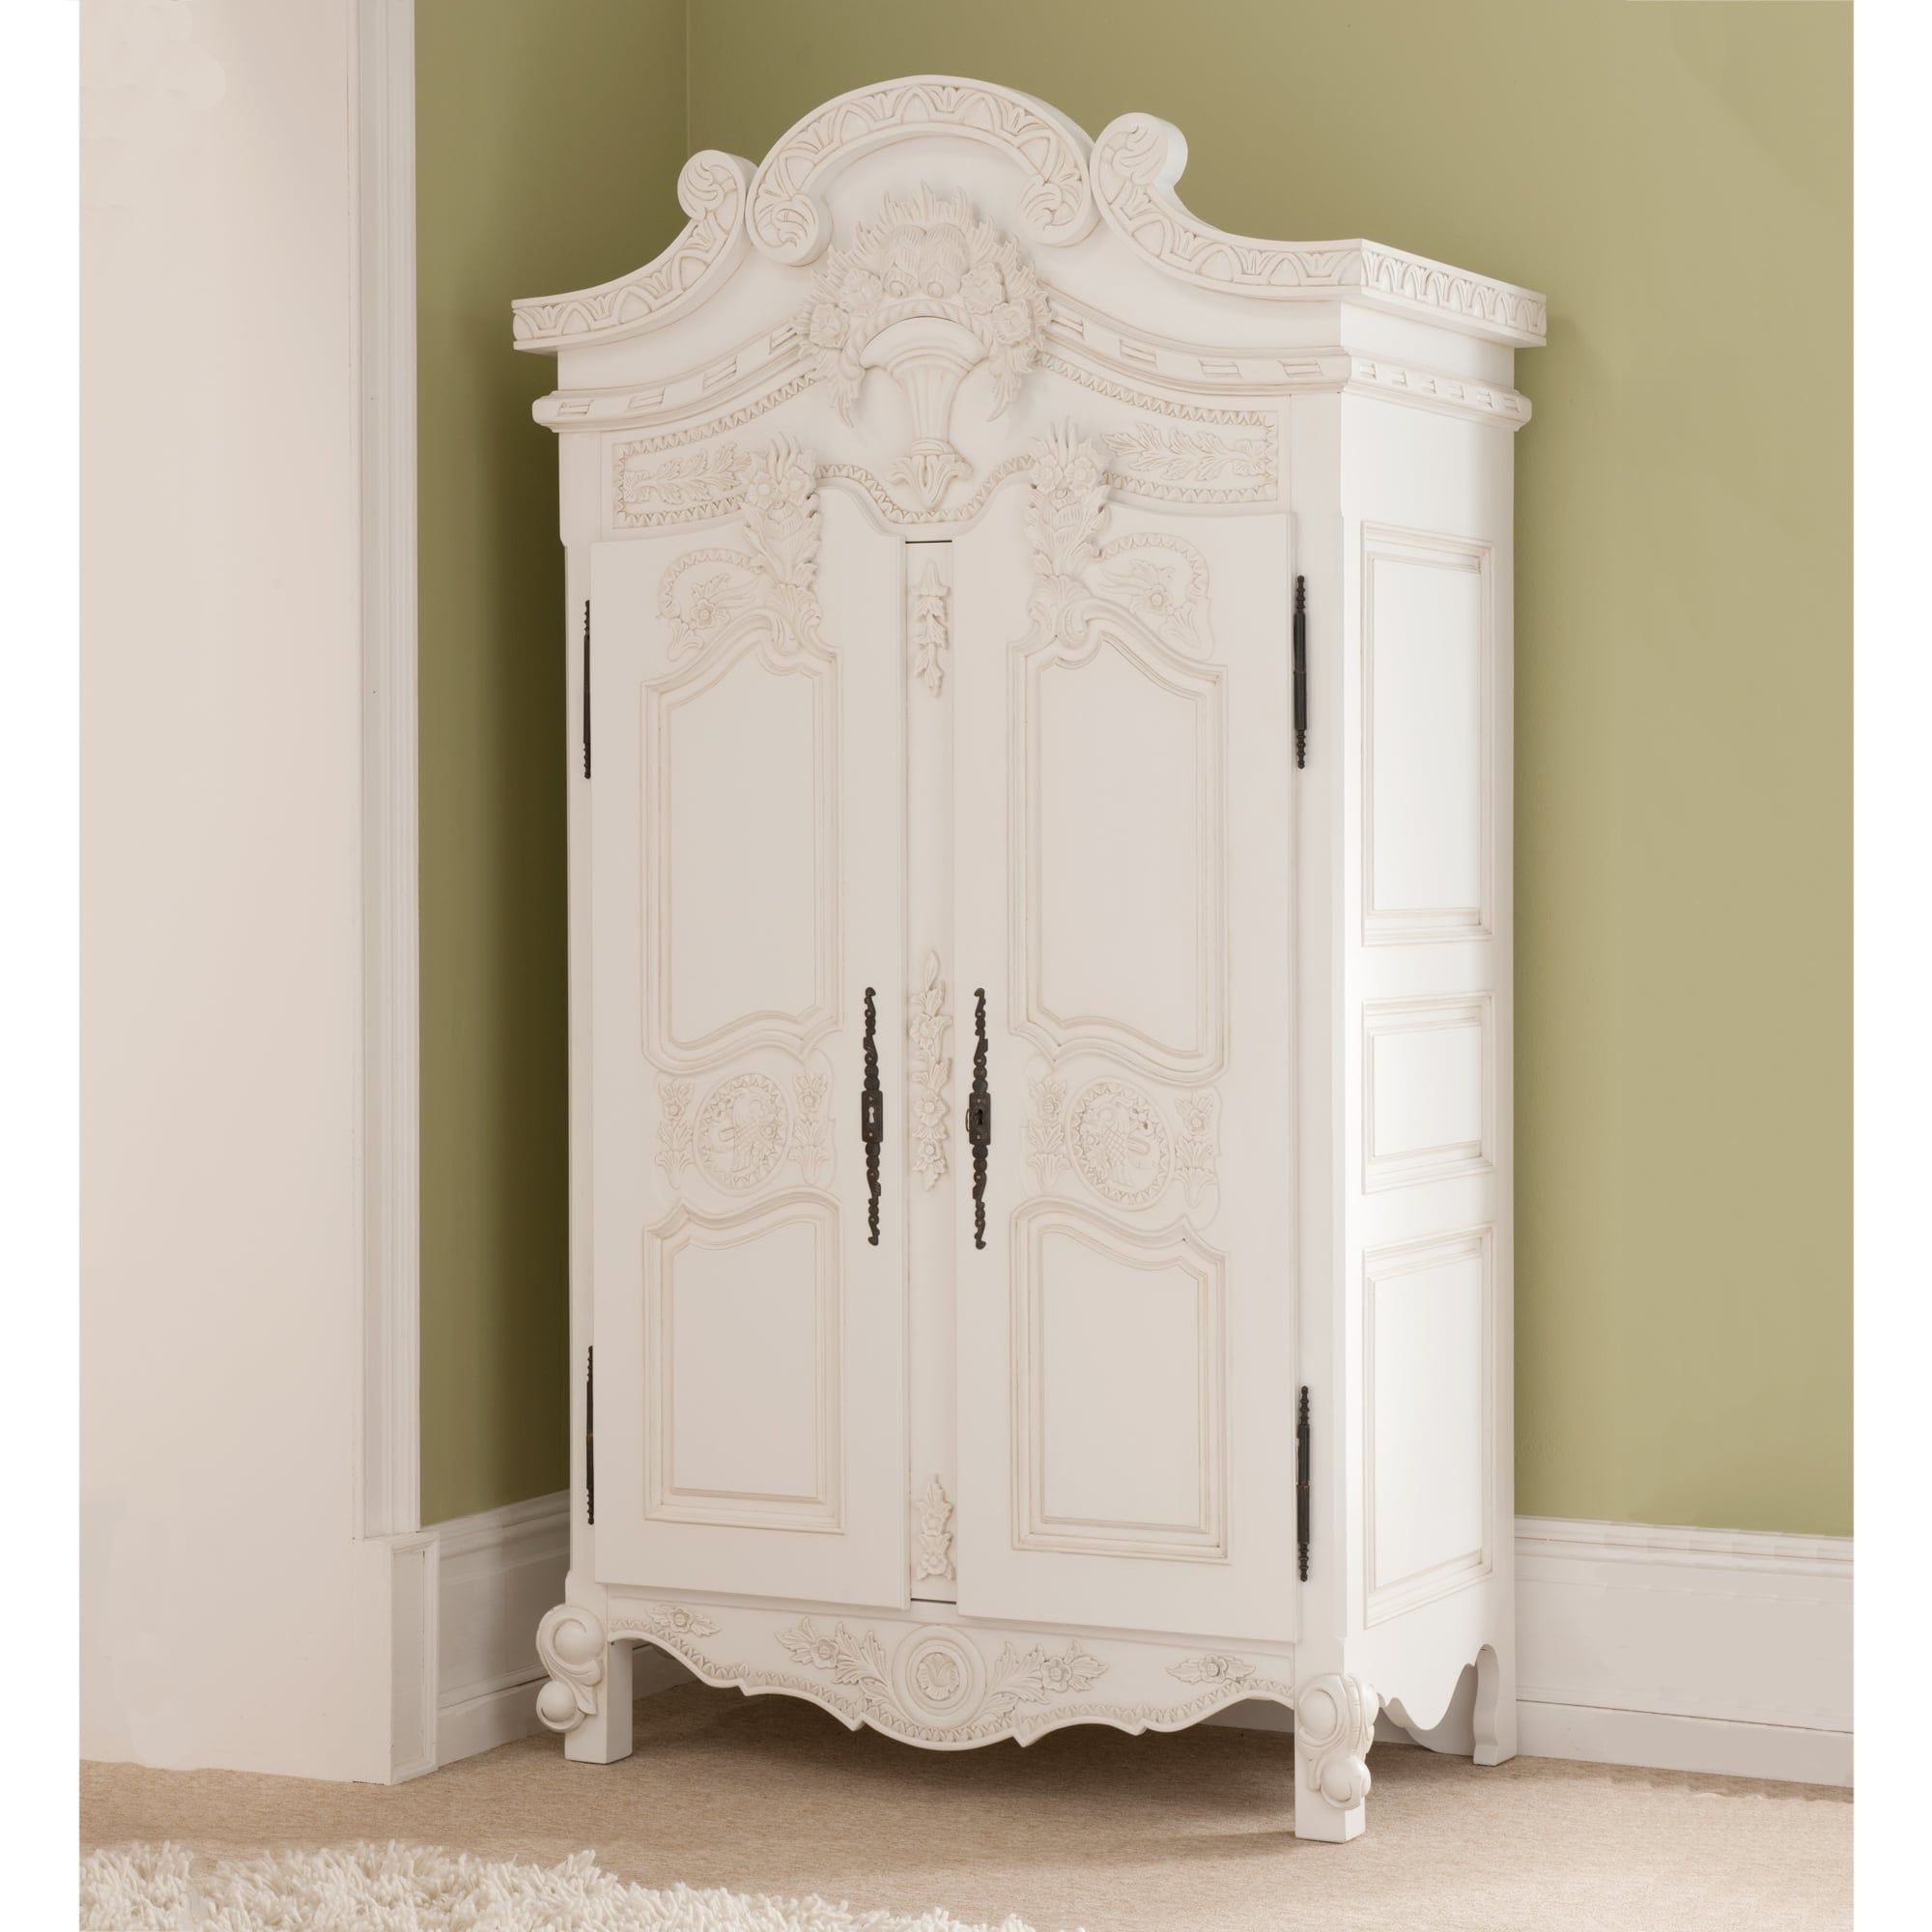 Rococo Antique French Style Wardrobe | Wooden 2 Door Wardrobes In White French Style Wardrobes (Gallery 10 of 20)